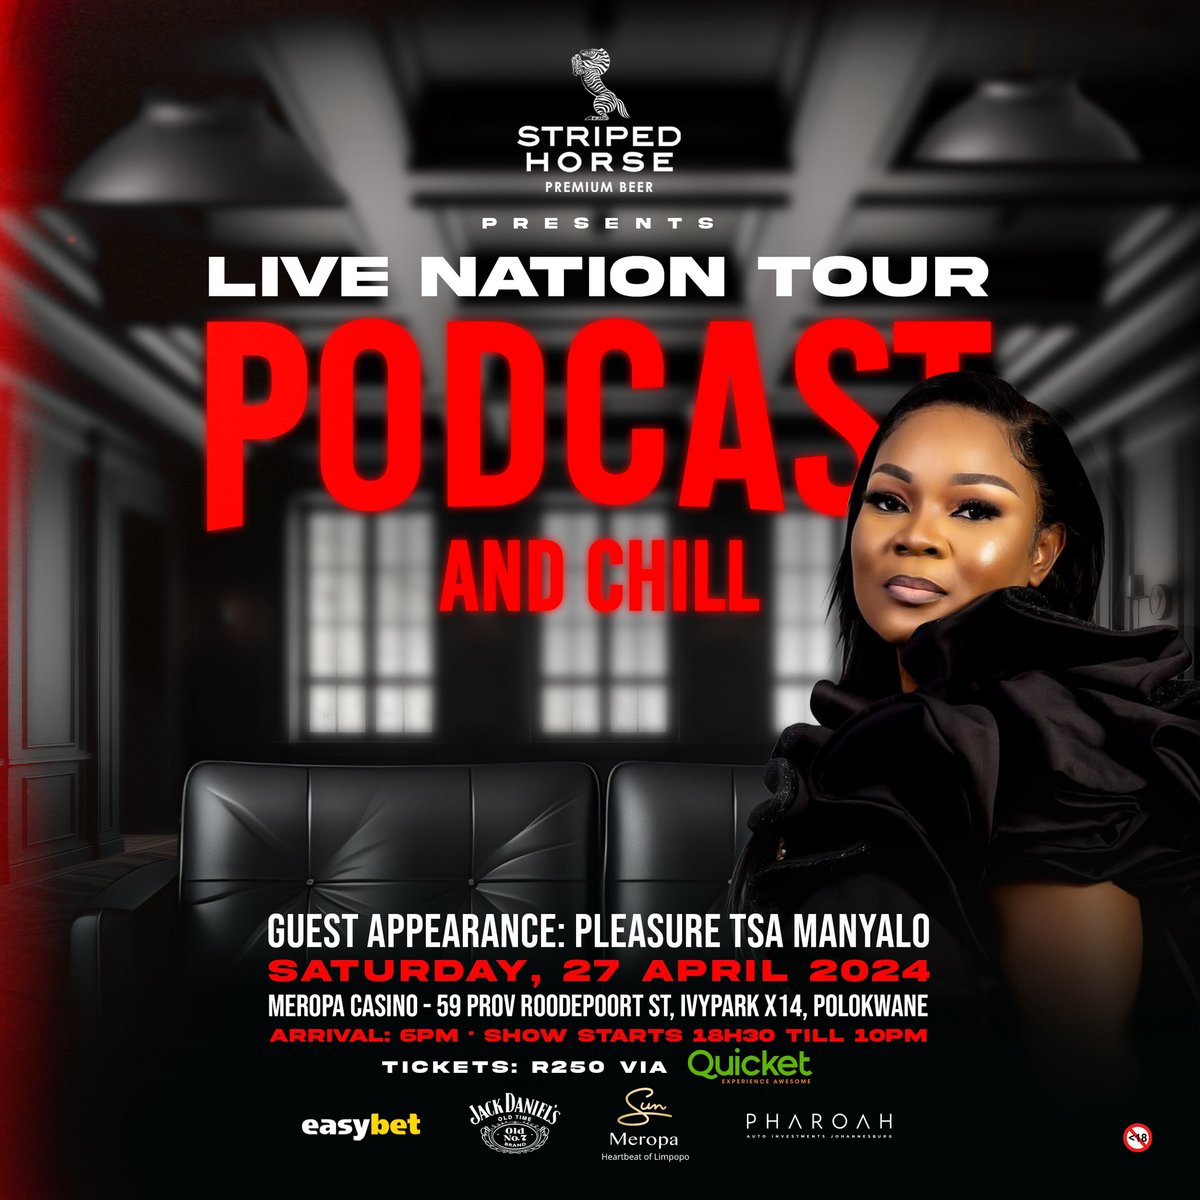 Thungisani 💥Rea lenyalong this weekend🚀 so if y’all know a couple here’s a plug 🔌 #podcastandchill will be at Meropa Casino ka di 27 tsa April 📍 and we got the amazing @PleasureTsaManyalo as a guest 💃🏽 We’re practicing our STEP ✨ Are You? Secure your spot on Quicket or…